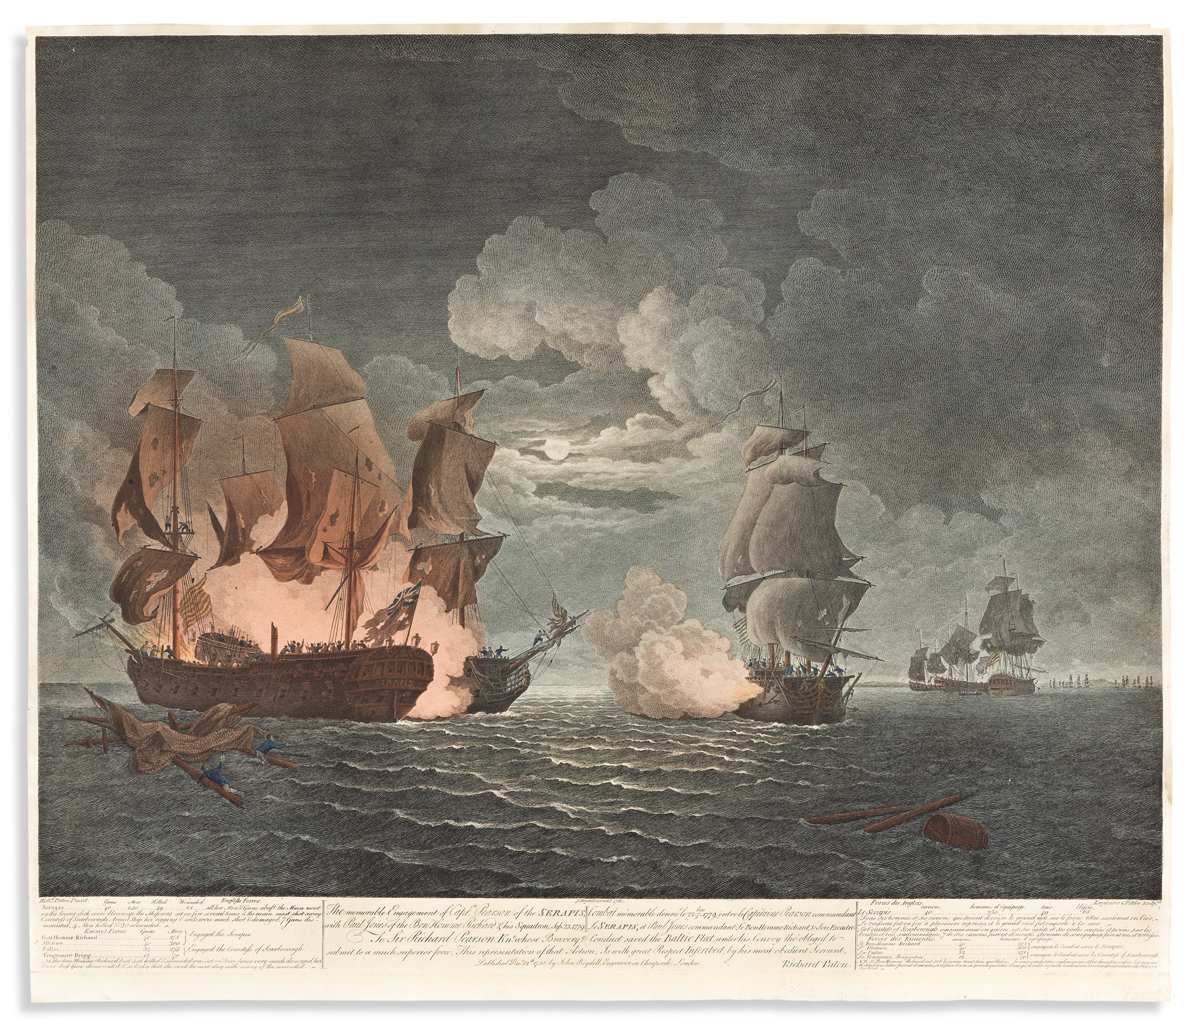 (REVOLUTION.) Fittler & Lerpinière, engravers; after Paton. Pair of naval views, including the great victory of John Paul Jones.